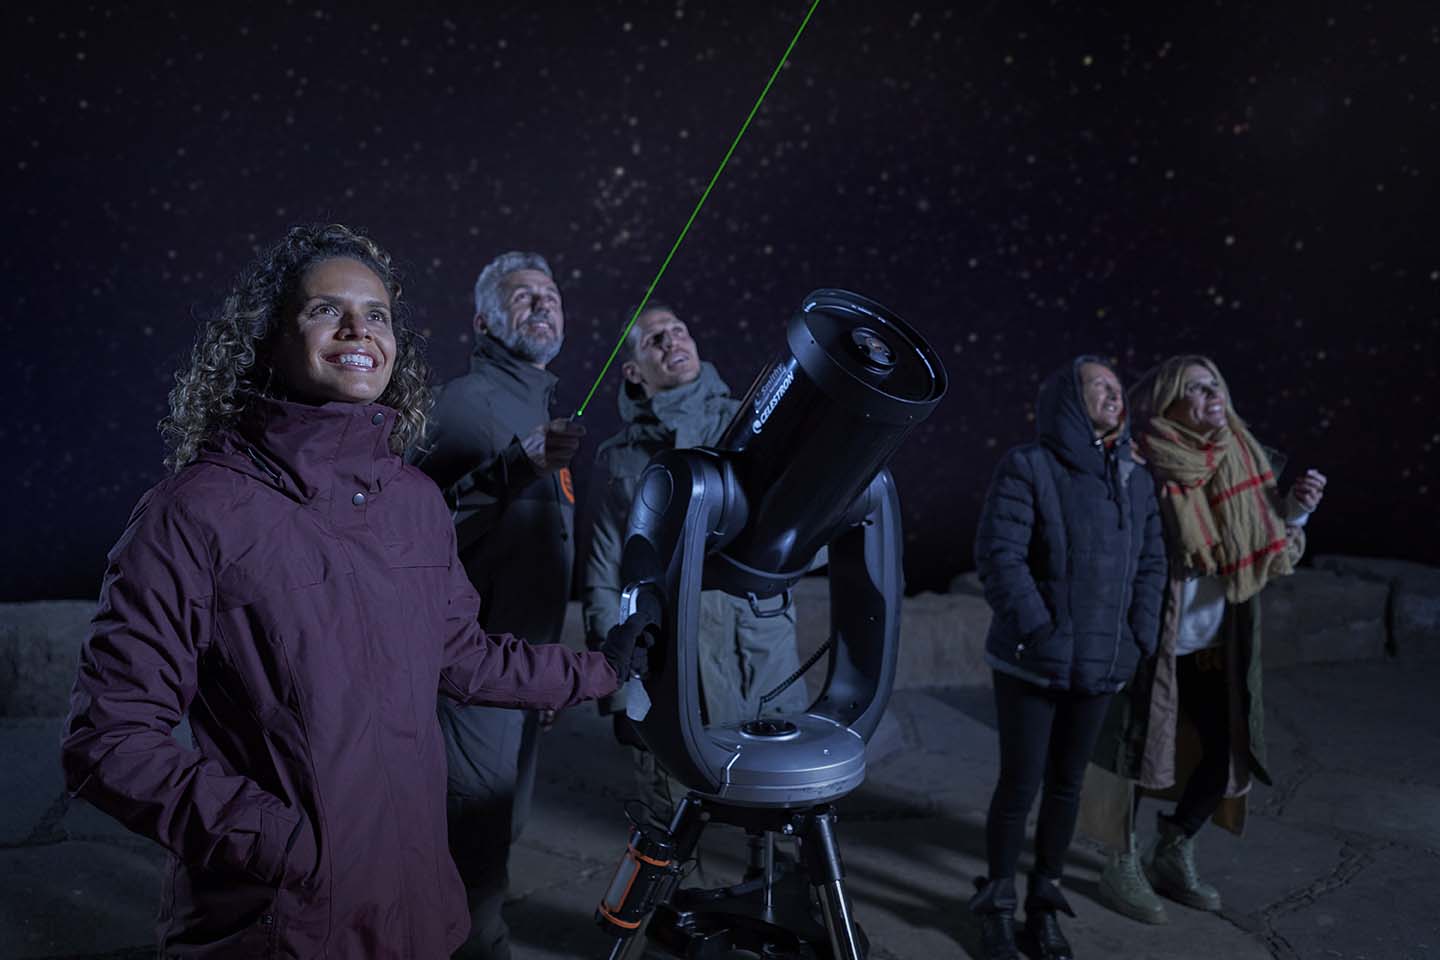 Visit Mount Teide and conduct an astronomical observation